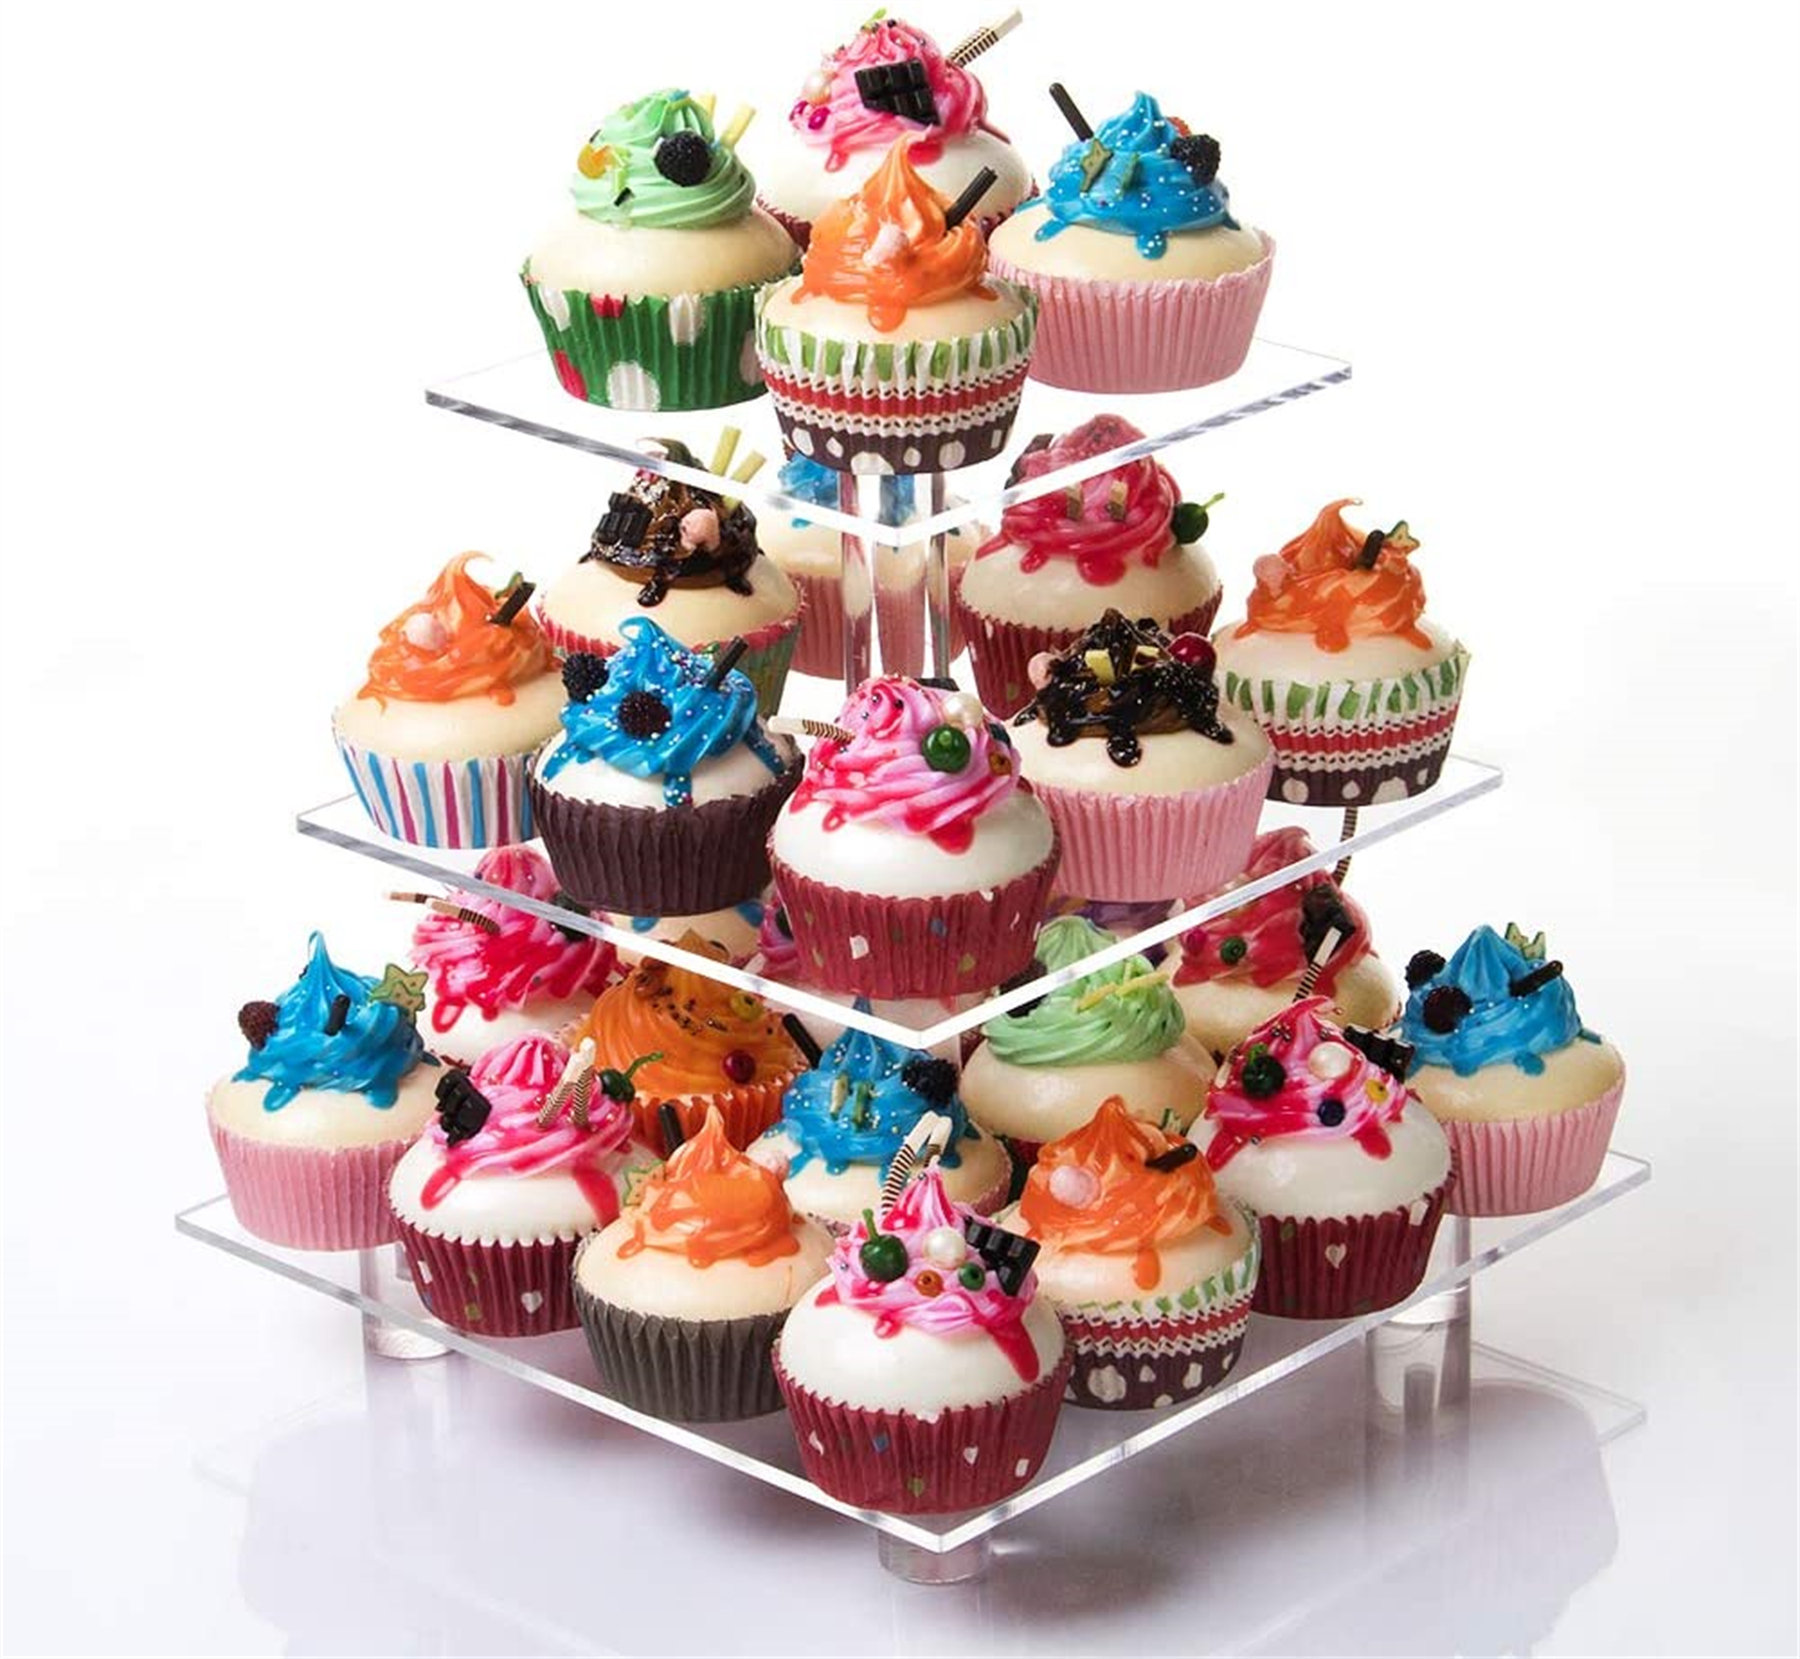 4 Tier Square Acrylic Cupcake Display Stand Holder Pastry Dessert Wedding Party